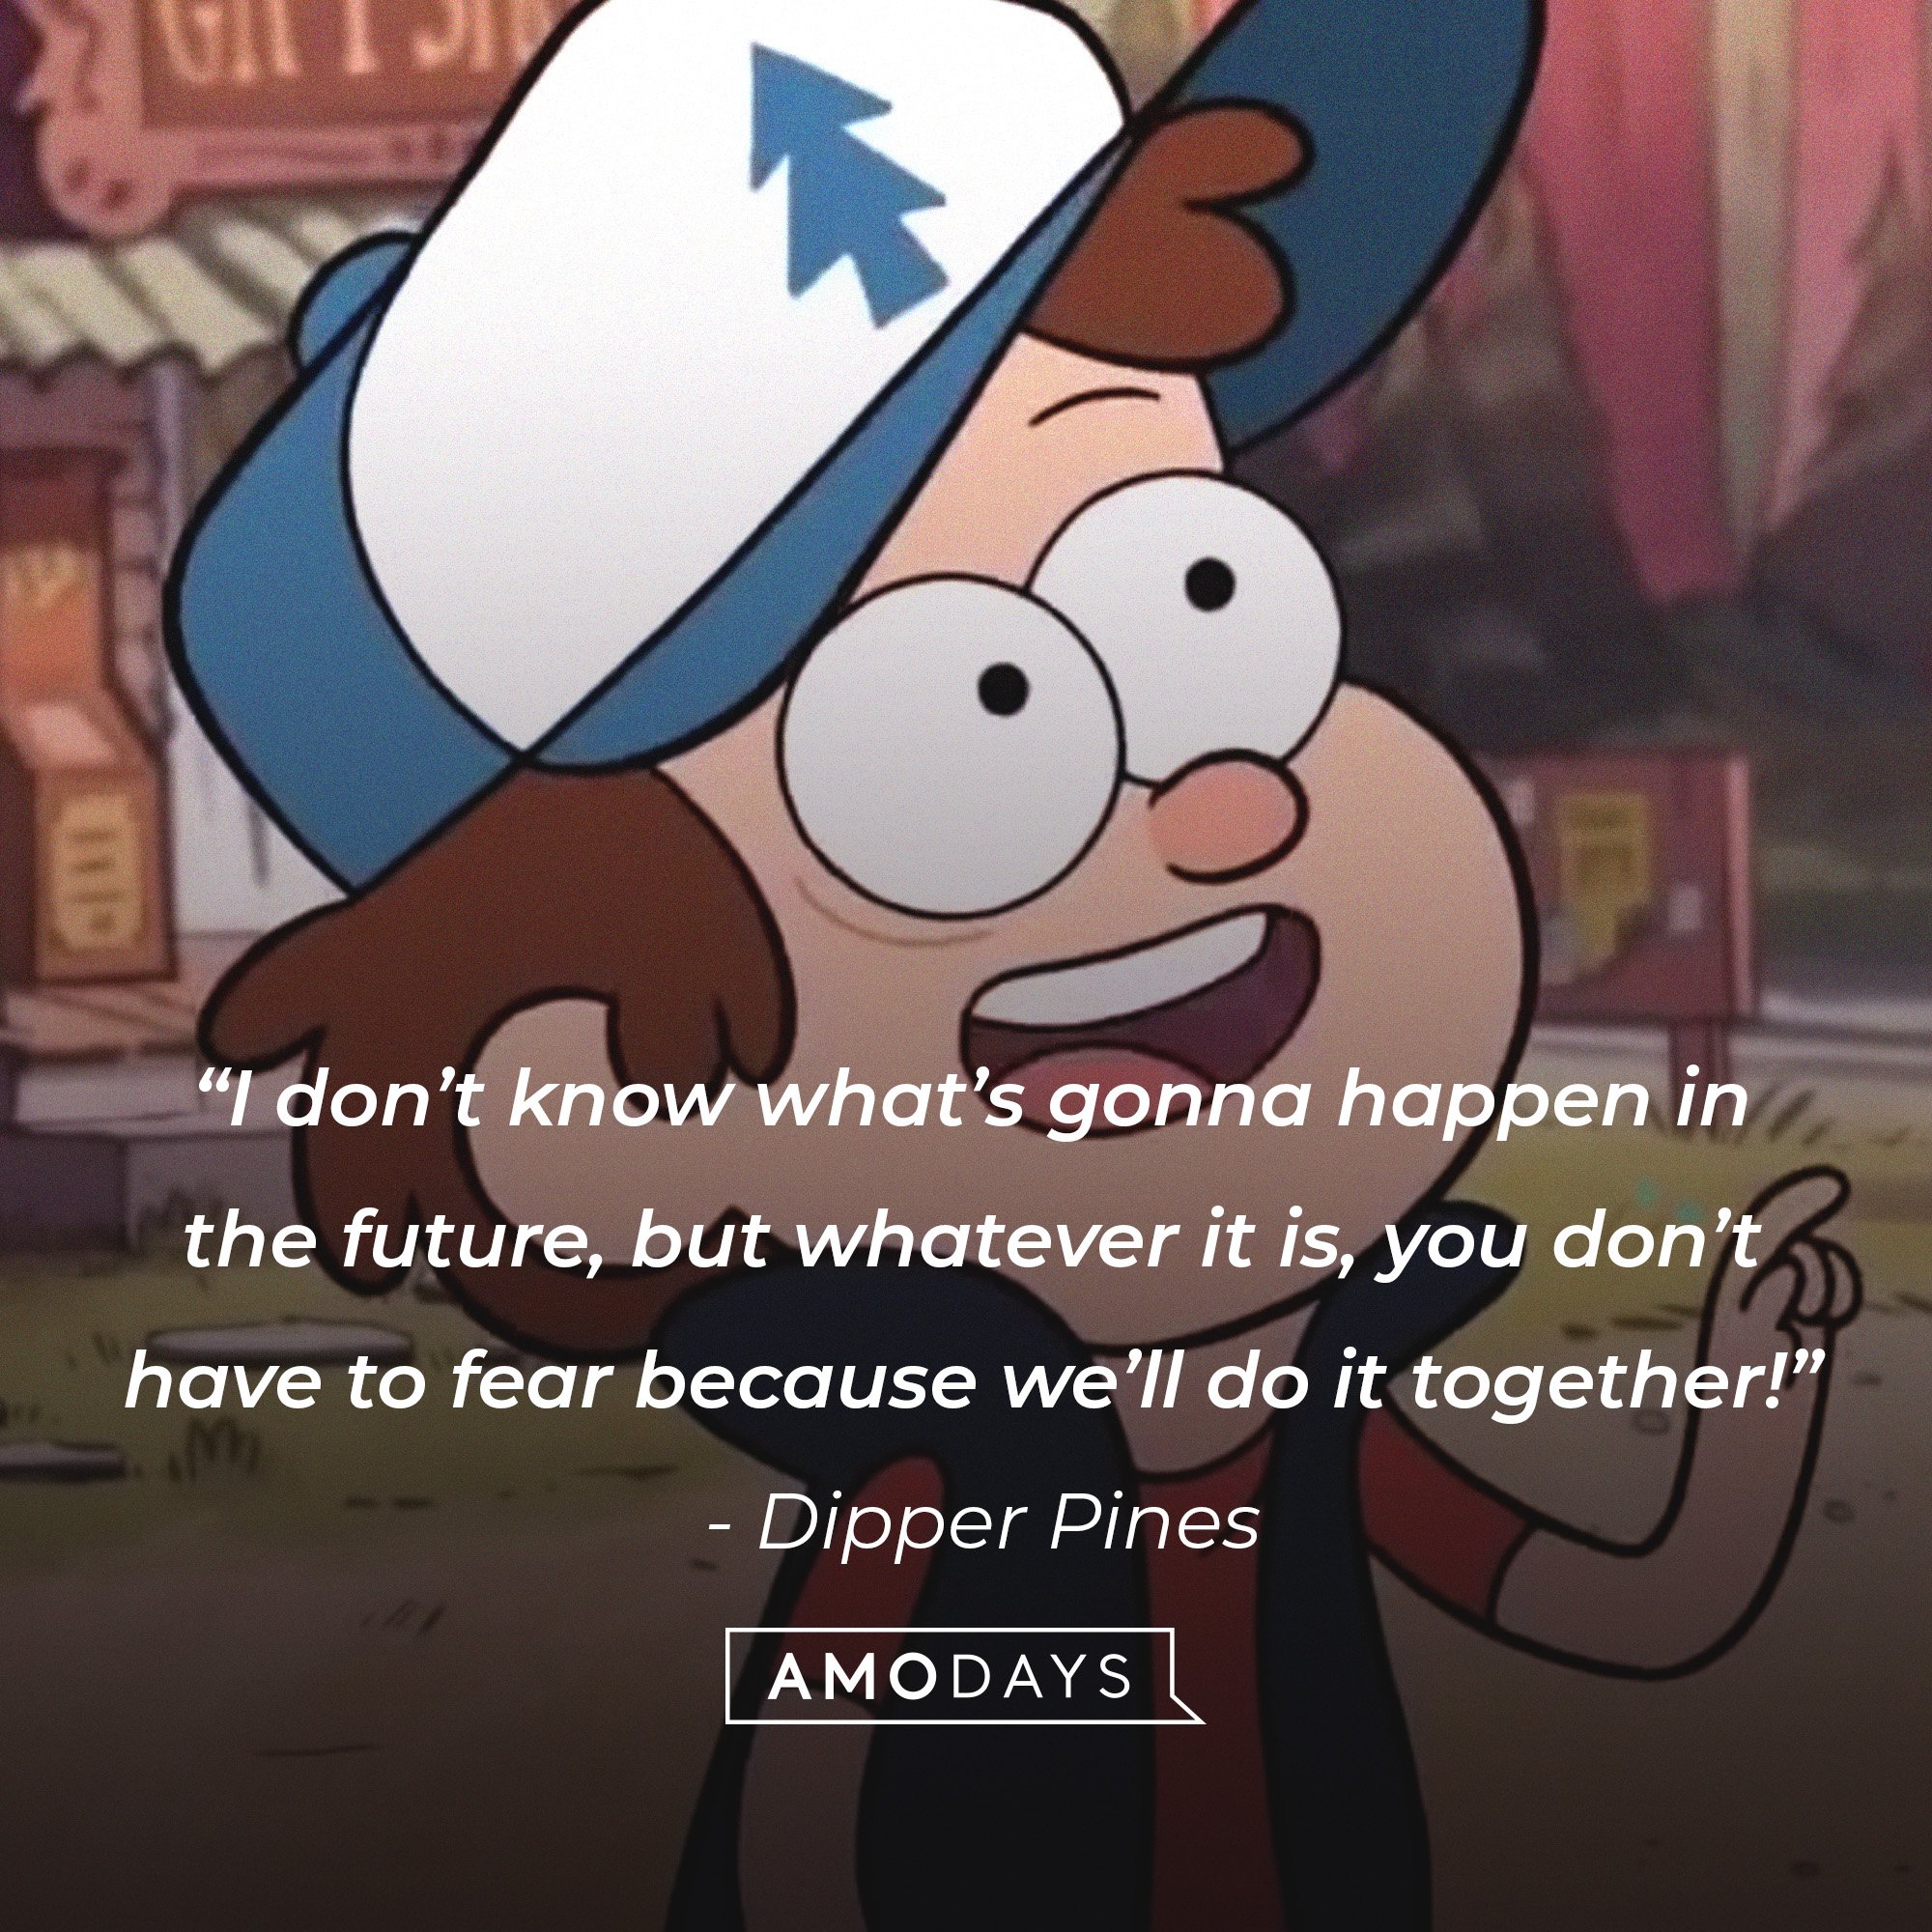 Dipper Pines’ quote: “I don’t know what’s gonna happen in the future, but whatever it is, you don’t have to fear because we’ll do it together!” | Image: AmoDays